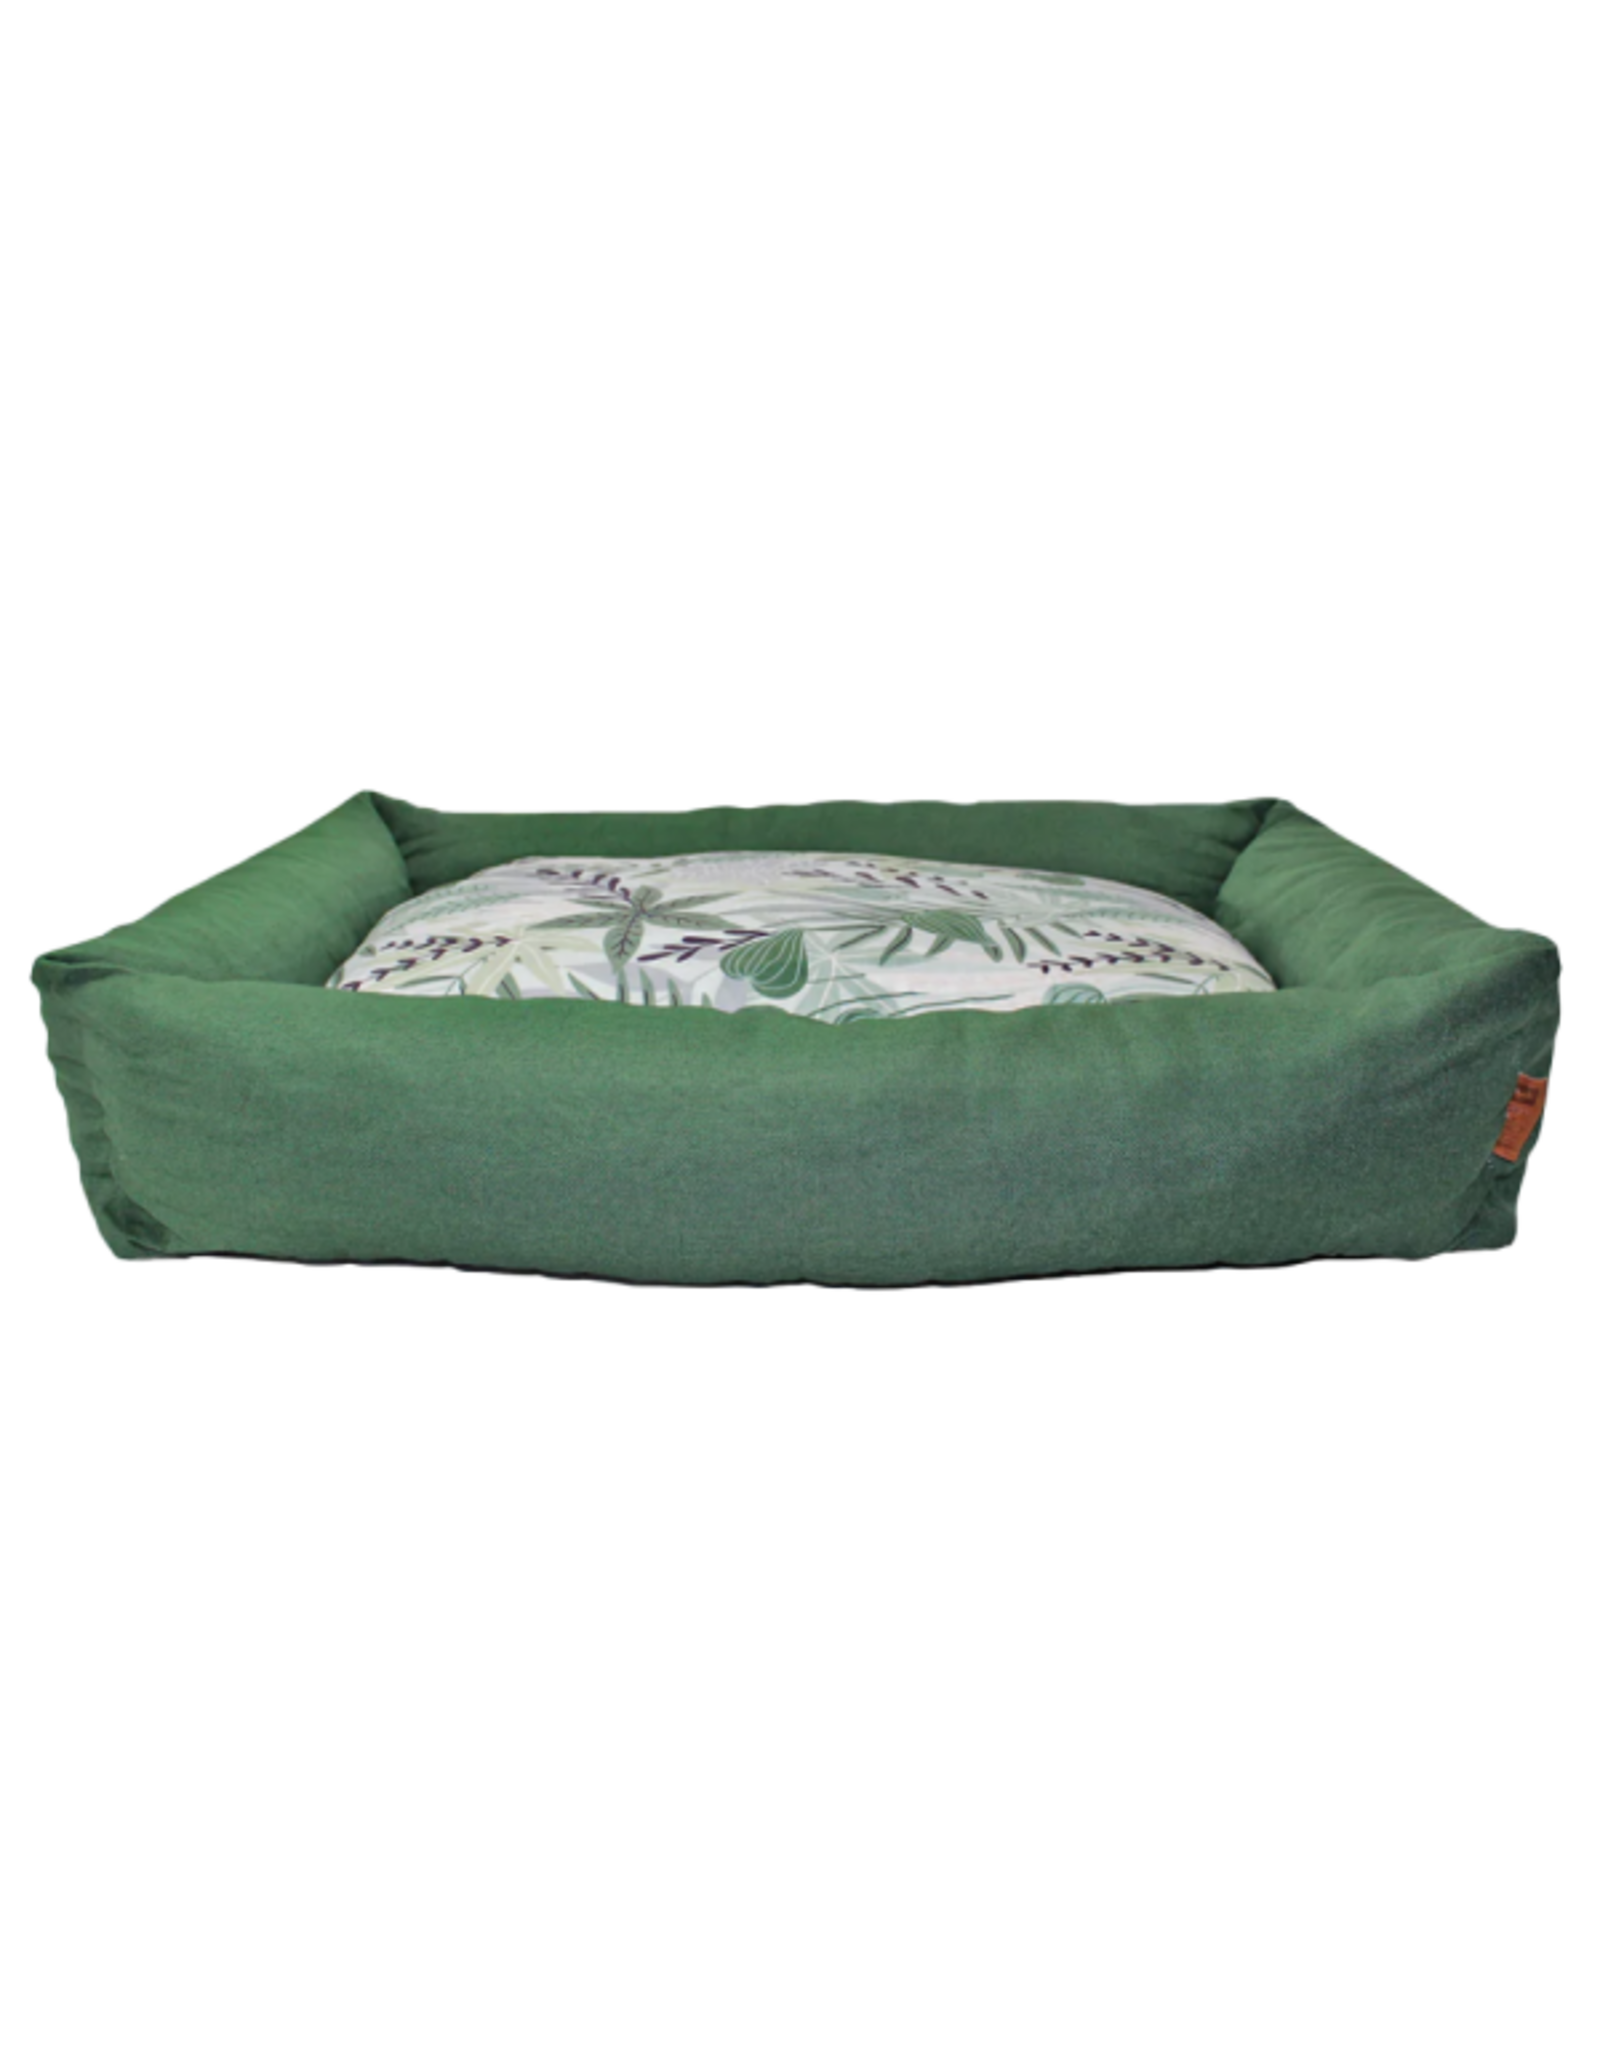 Be One Breed BeOneBreed The Cozy Bed Small Green 18" x 23"